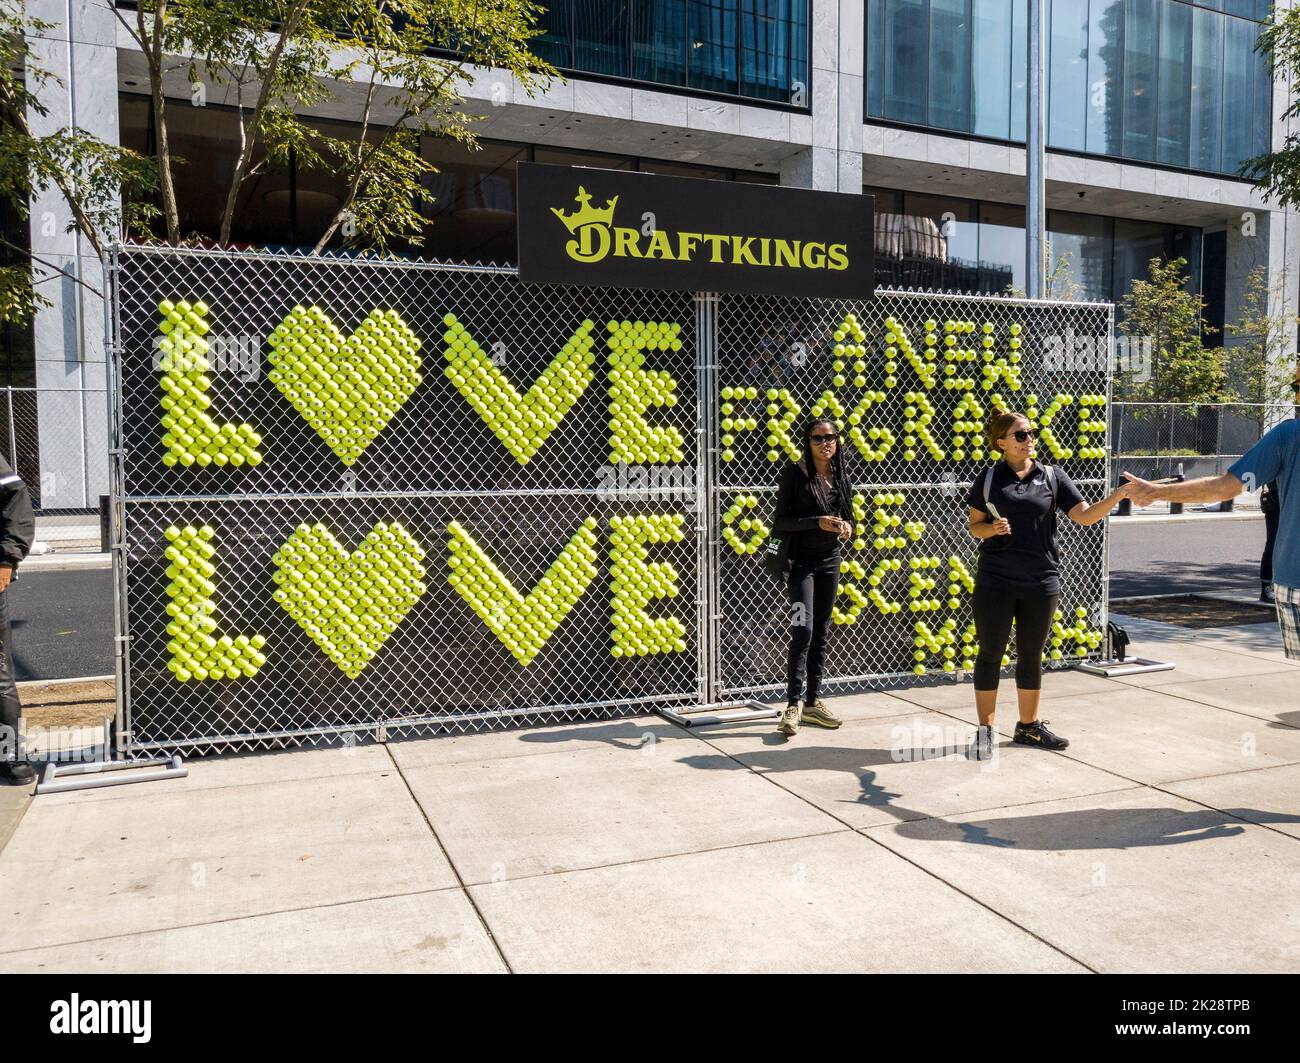 A brand activation for the sportsbook company DraftKings in Hudson Yards in New York on Friday, September 9, 2022. Tied in with the U.S. Open the company is promoting a limited edition fragrance called Love Love as well as their sportsbook on the tennis tournament. The fragrance smells like tennis balls. .(© Richard B. Levine) Stock Photo